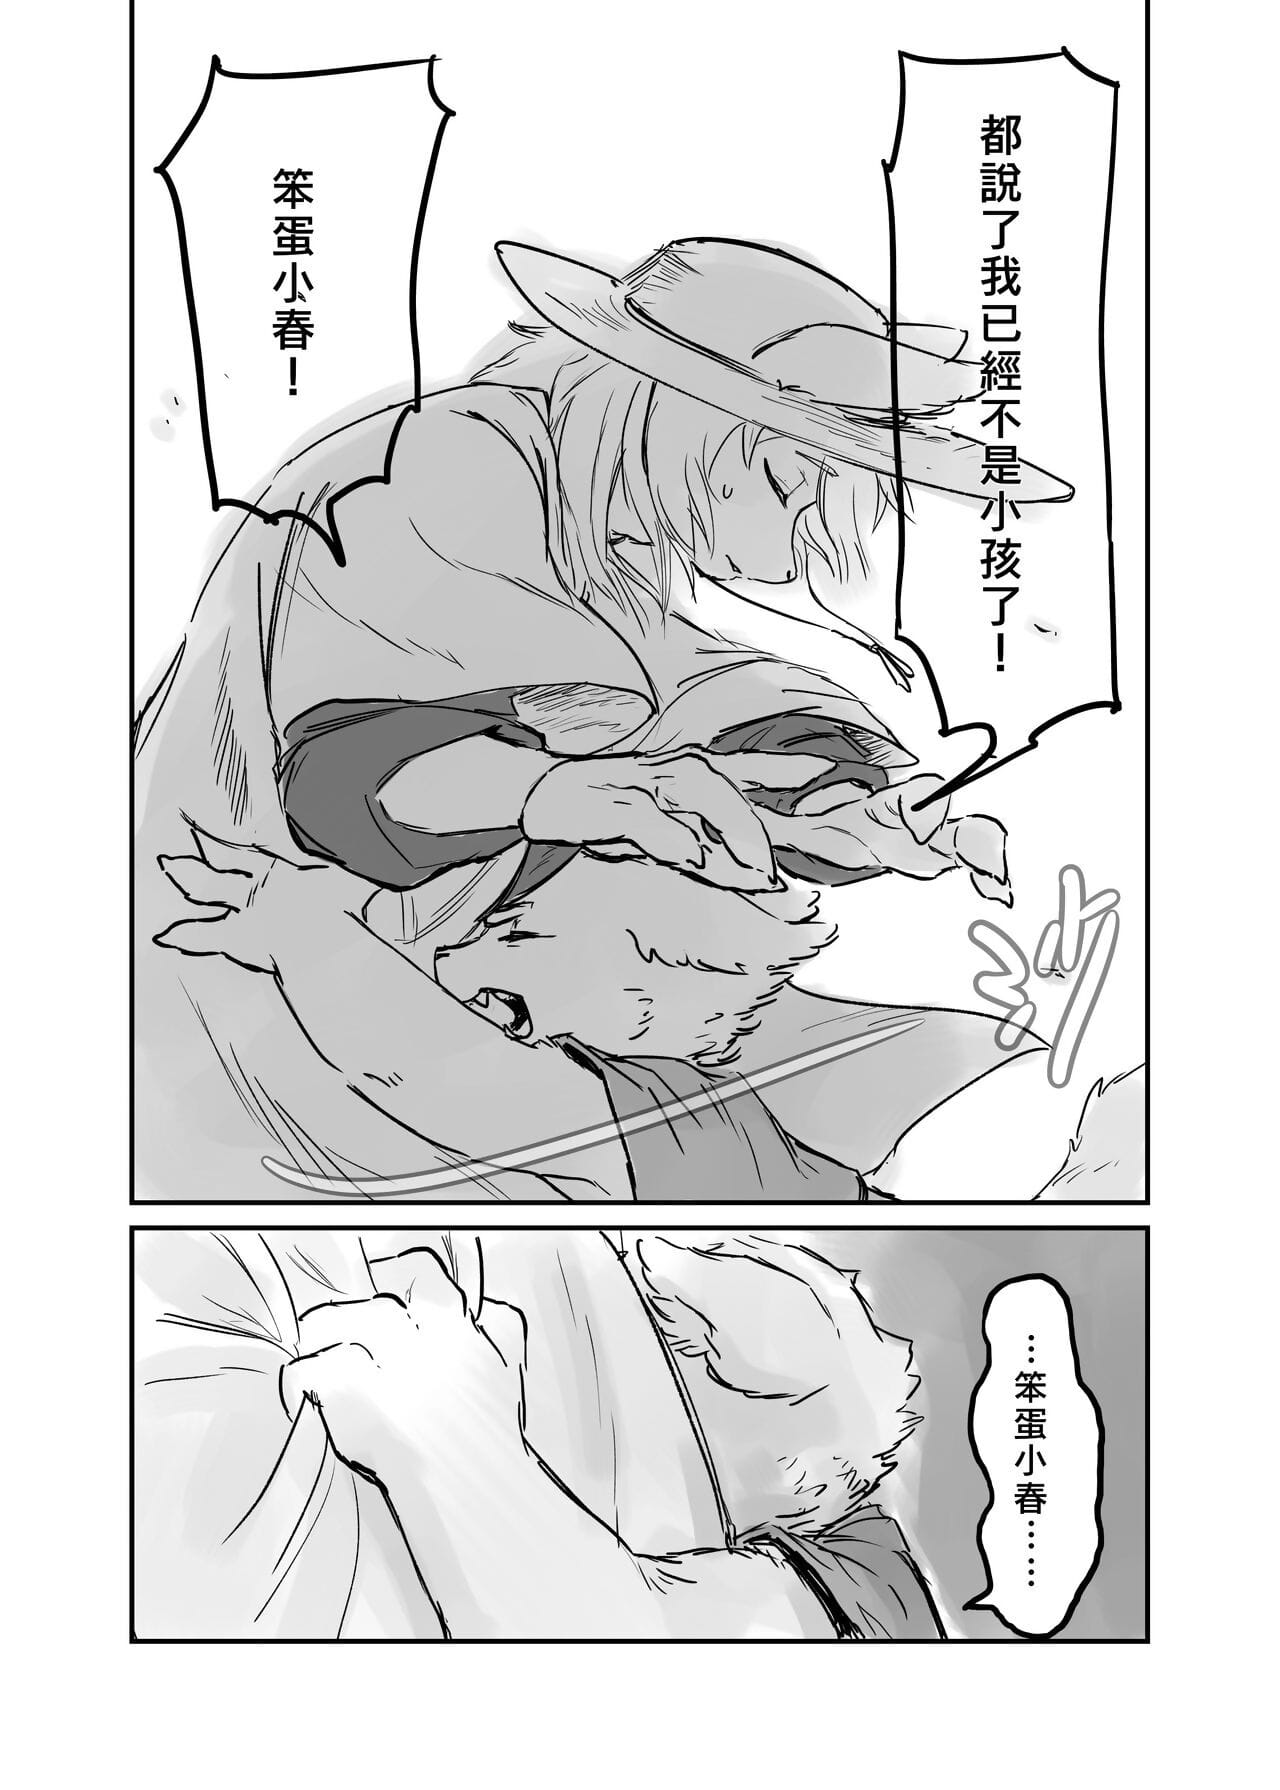 （the visitatore 他乡之人 by：鬼流 parte 2 page 1